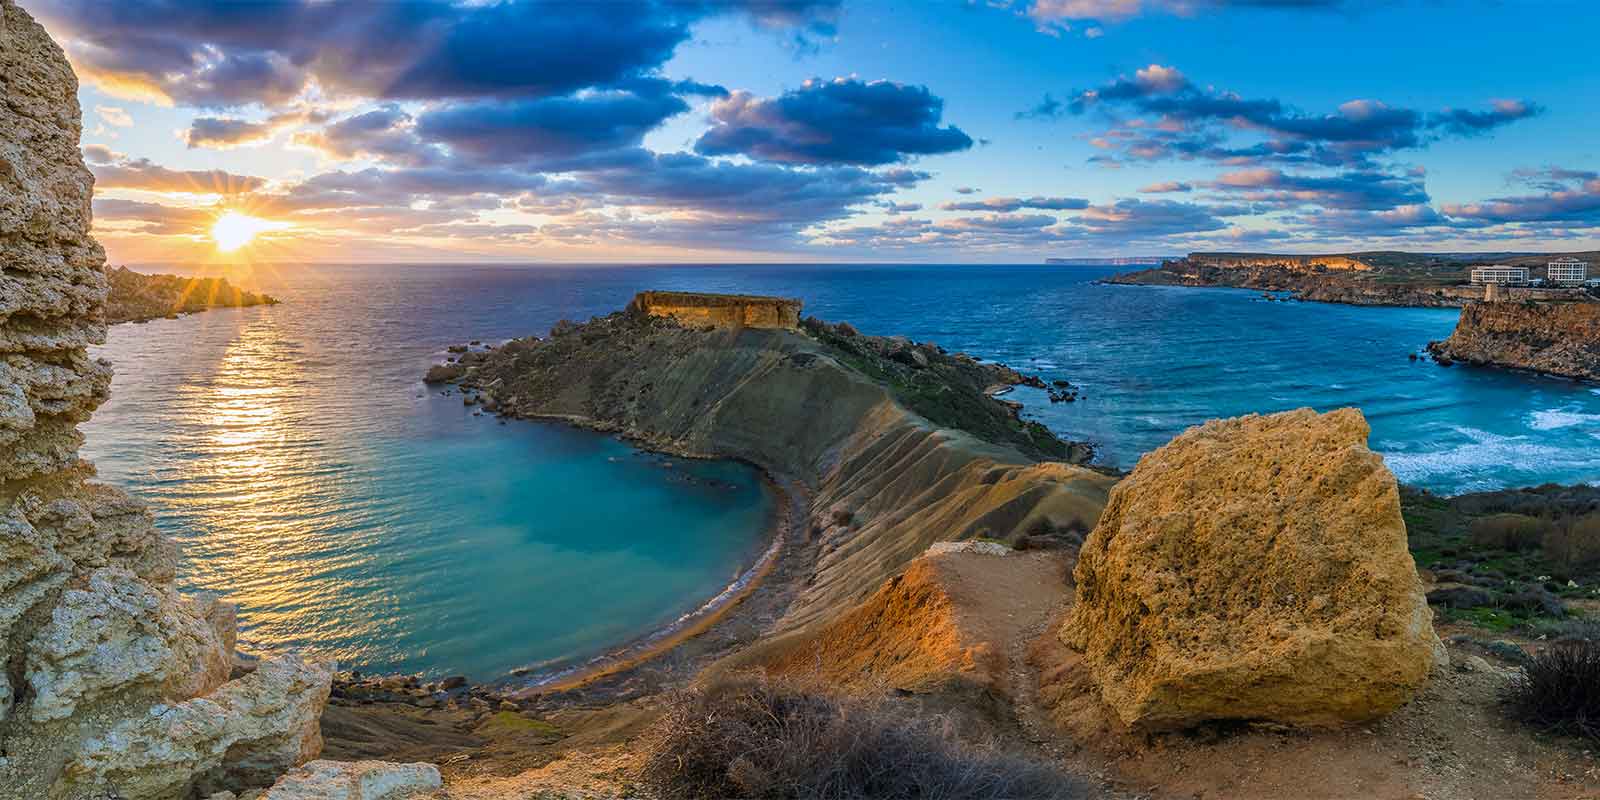 View at sunset out over Gnejna Bay and Golden Bay on the island of Malta